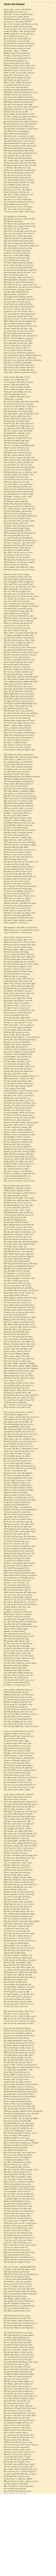 Absalom And Achitophel Poem By John Dryden